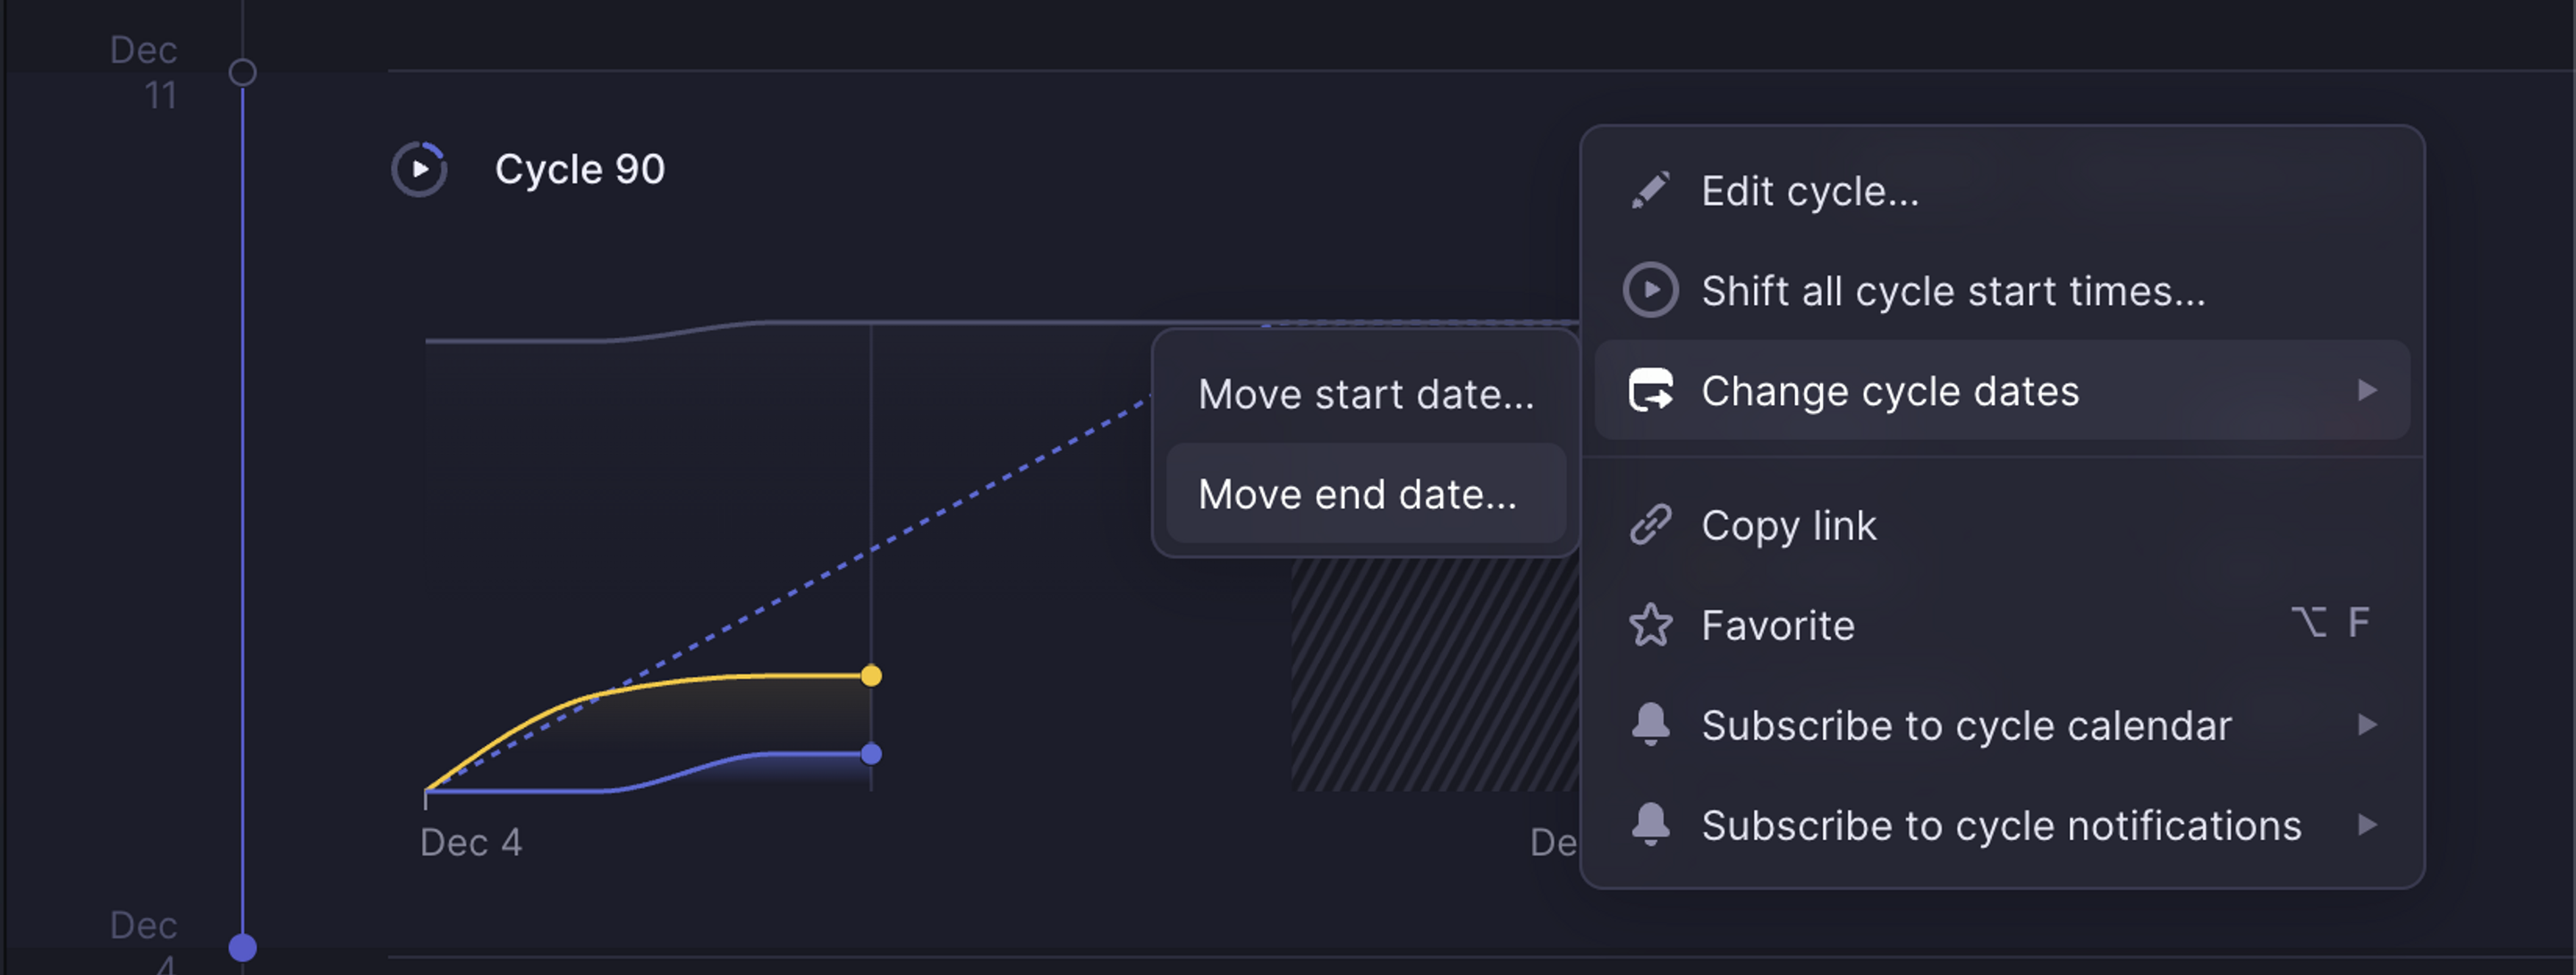 open menu on Cycles page showing Change cycle dates option